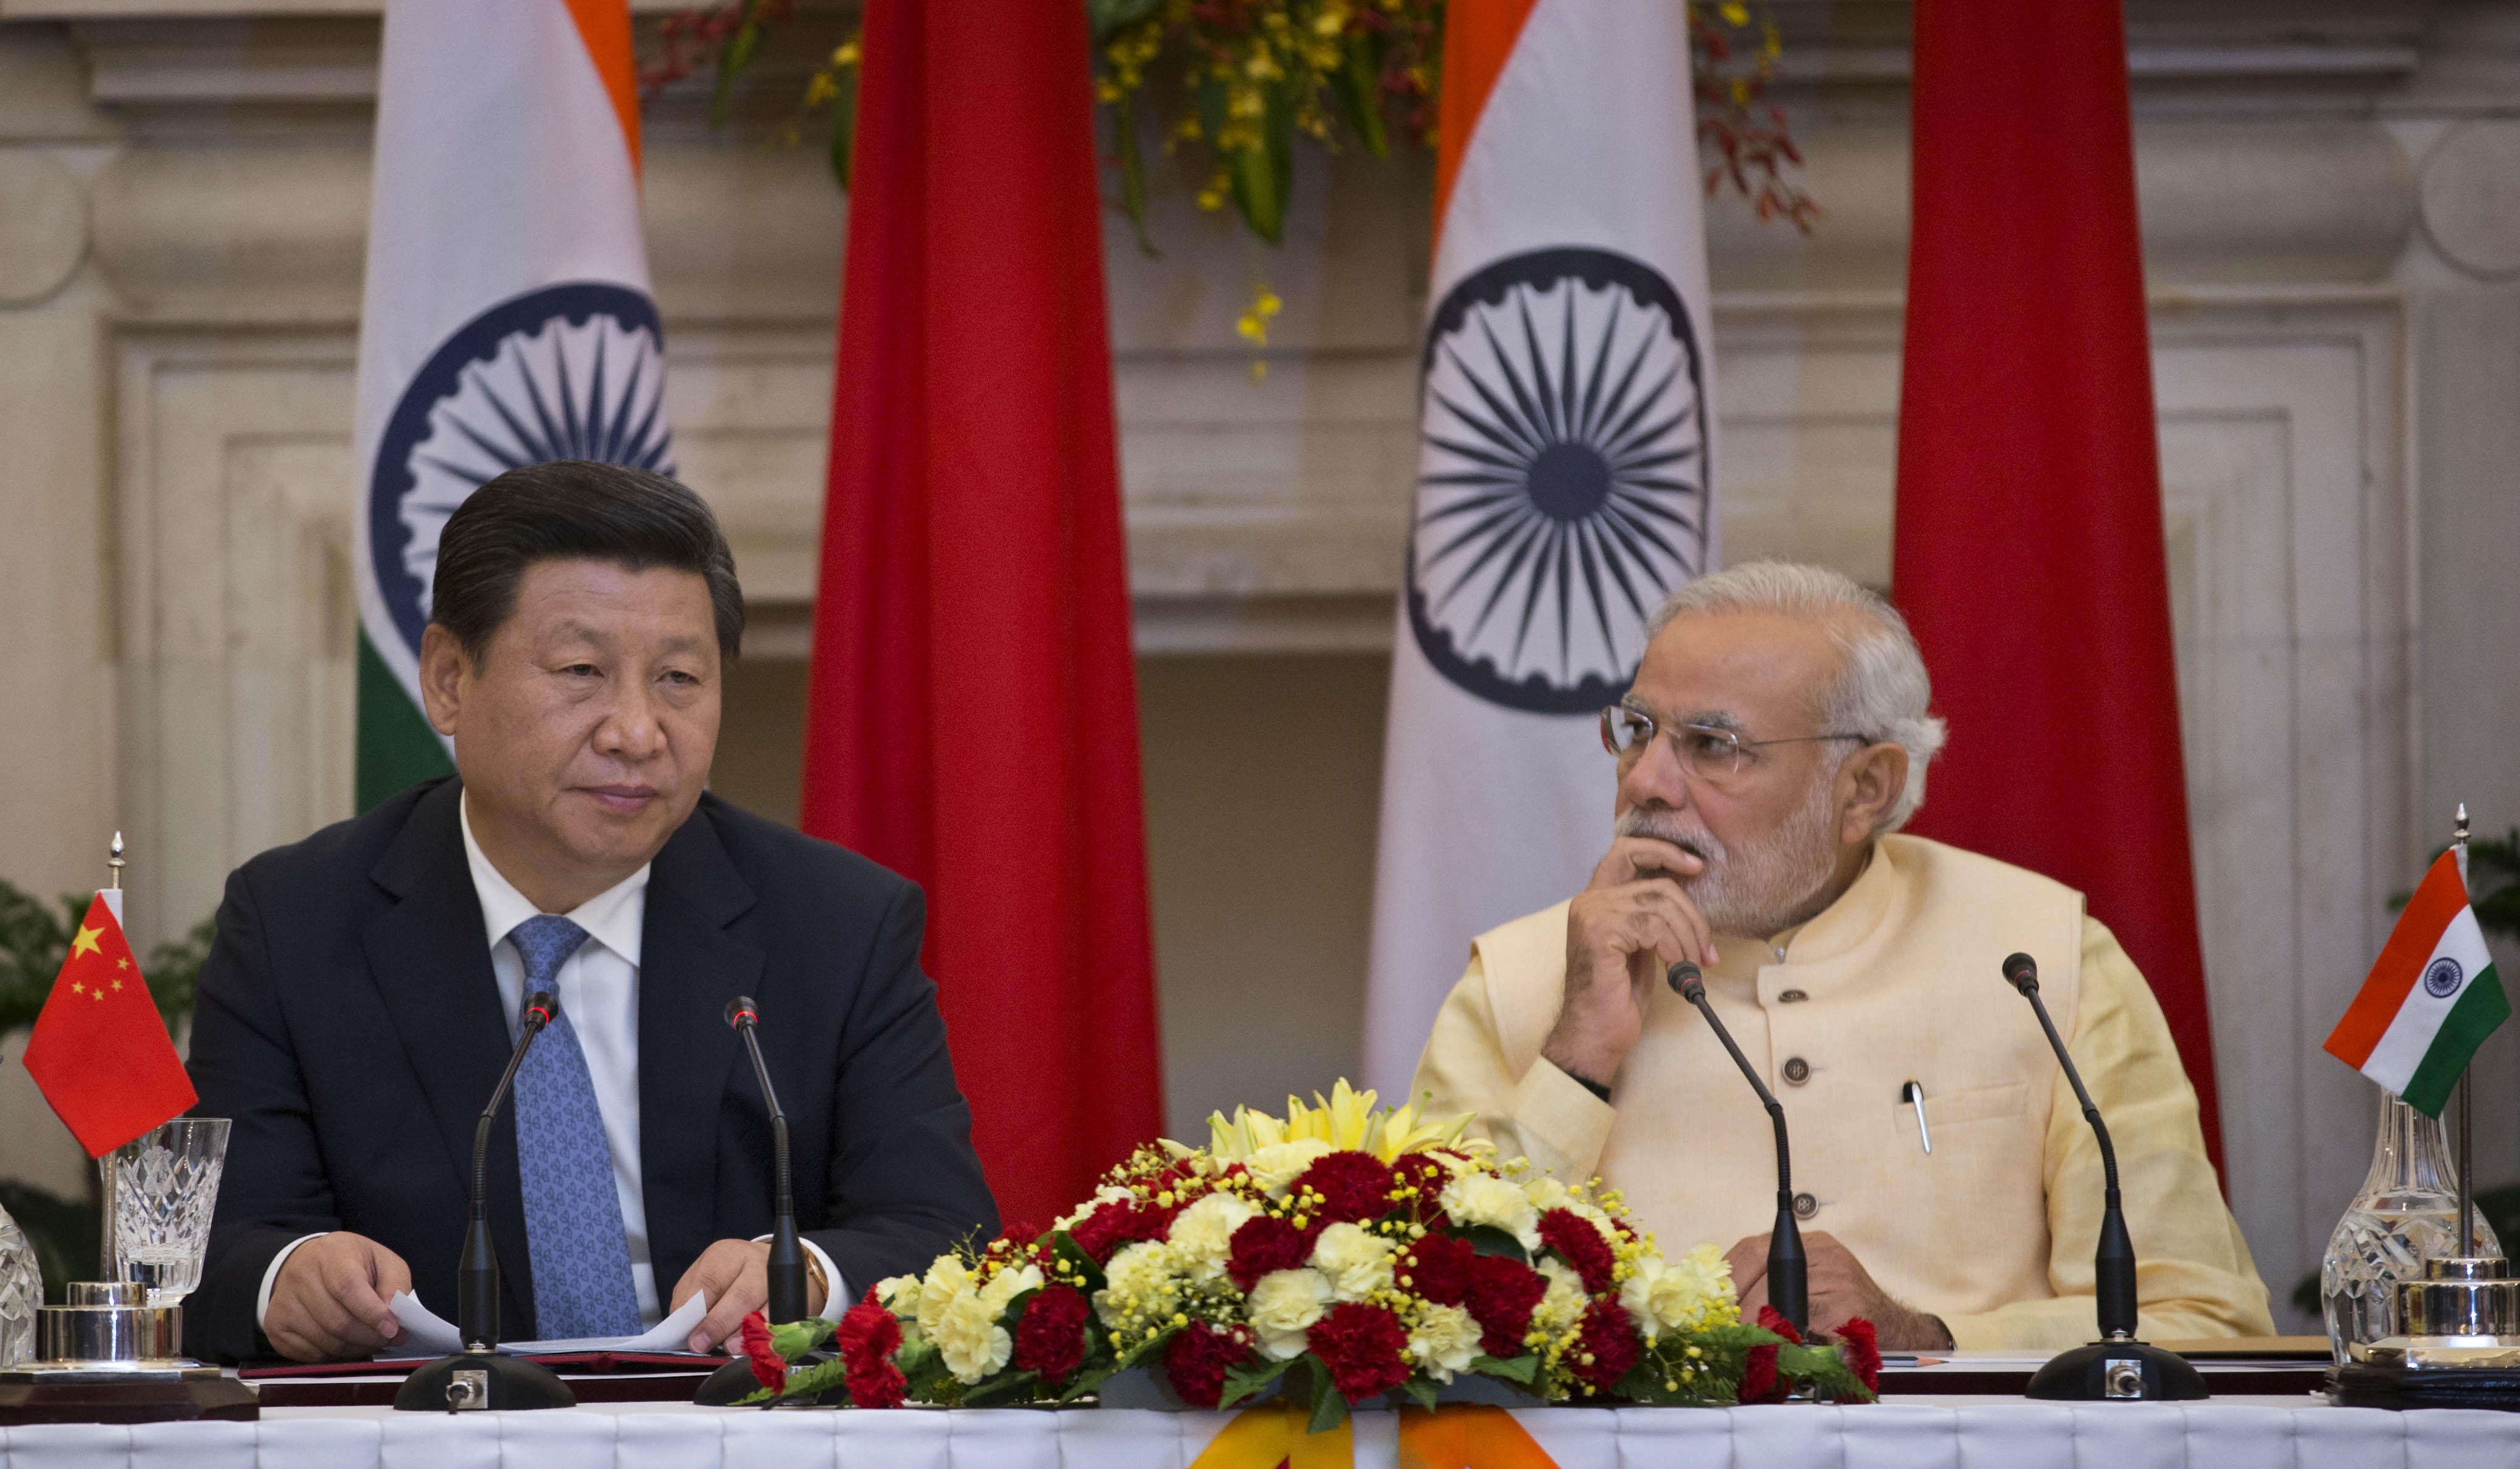 Chinese President Xi Jinping (L) makes a statement before the media as Indian Prime Minister Narendra Modi (R) watches after signing agreements in New Delhi, India on Sept. 18, 2014. (Manish Swarup—AP)